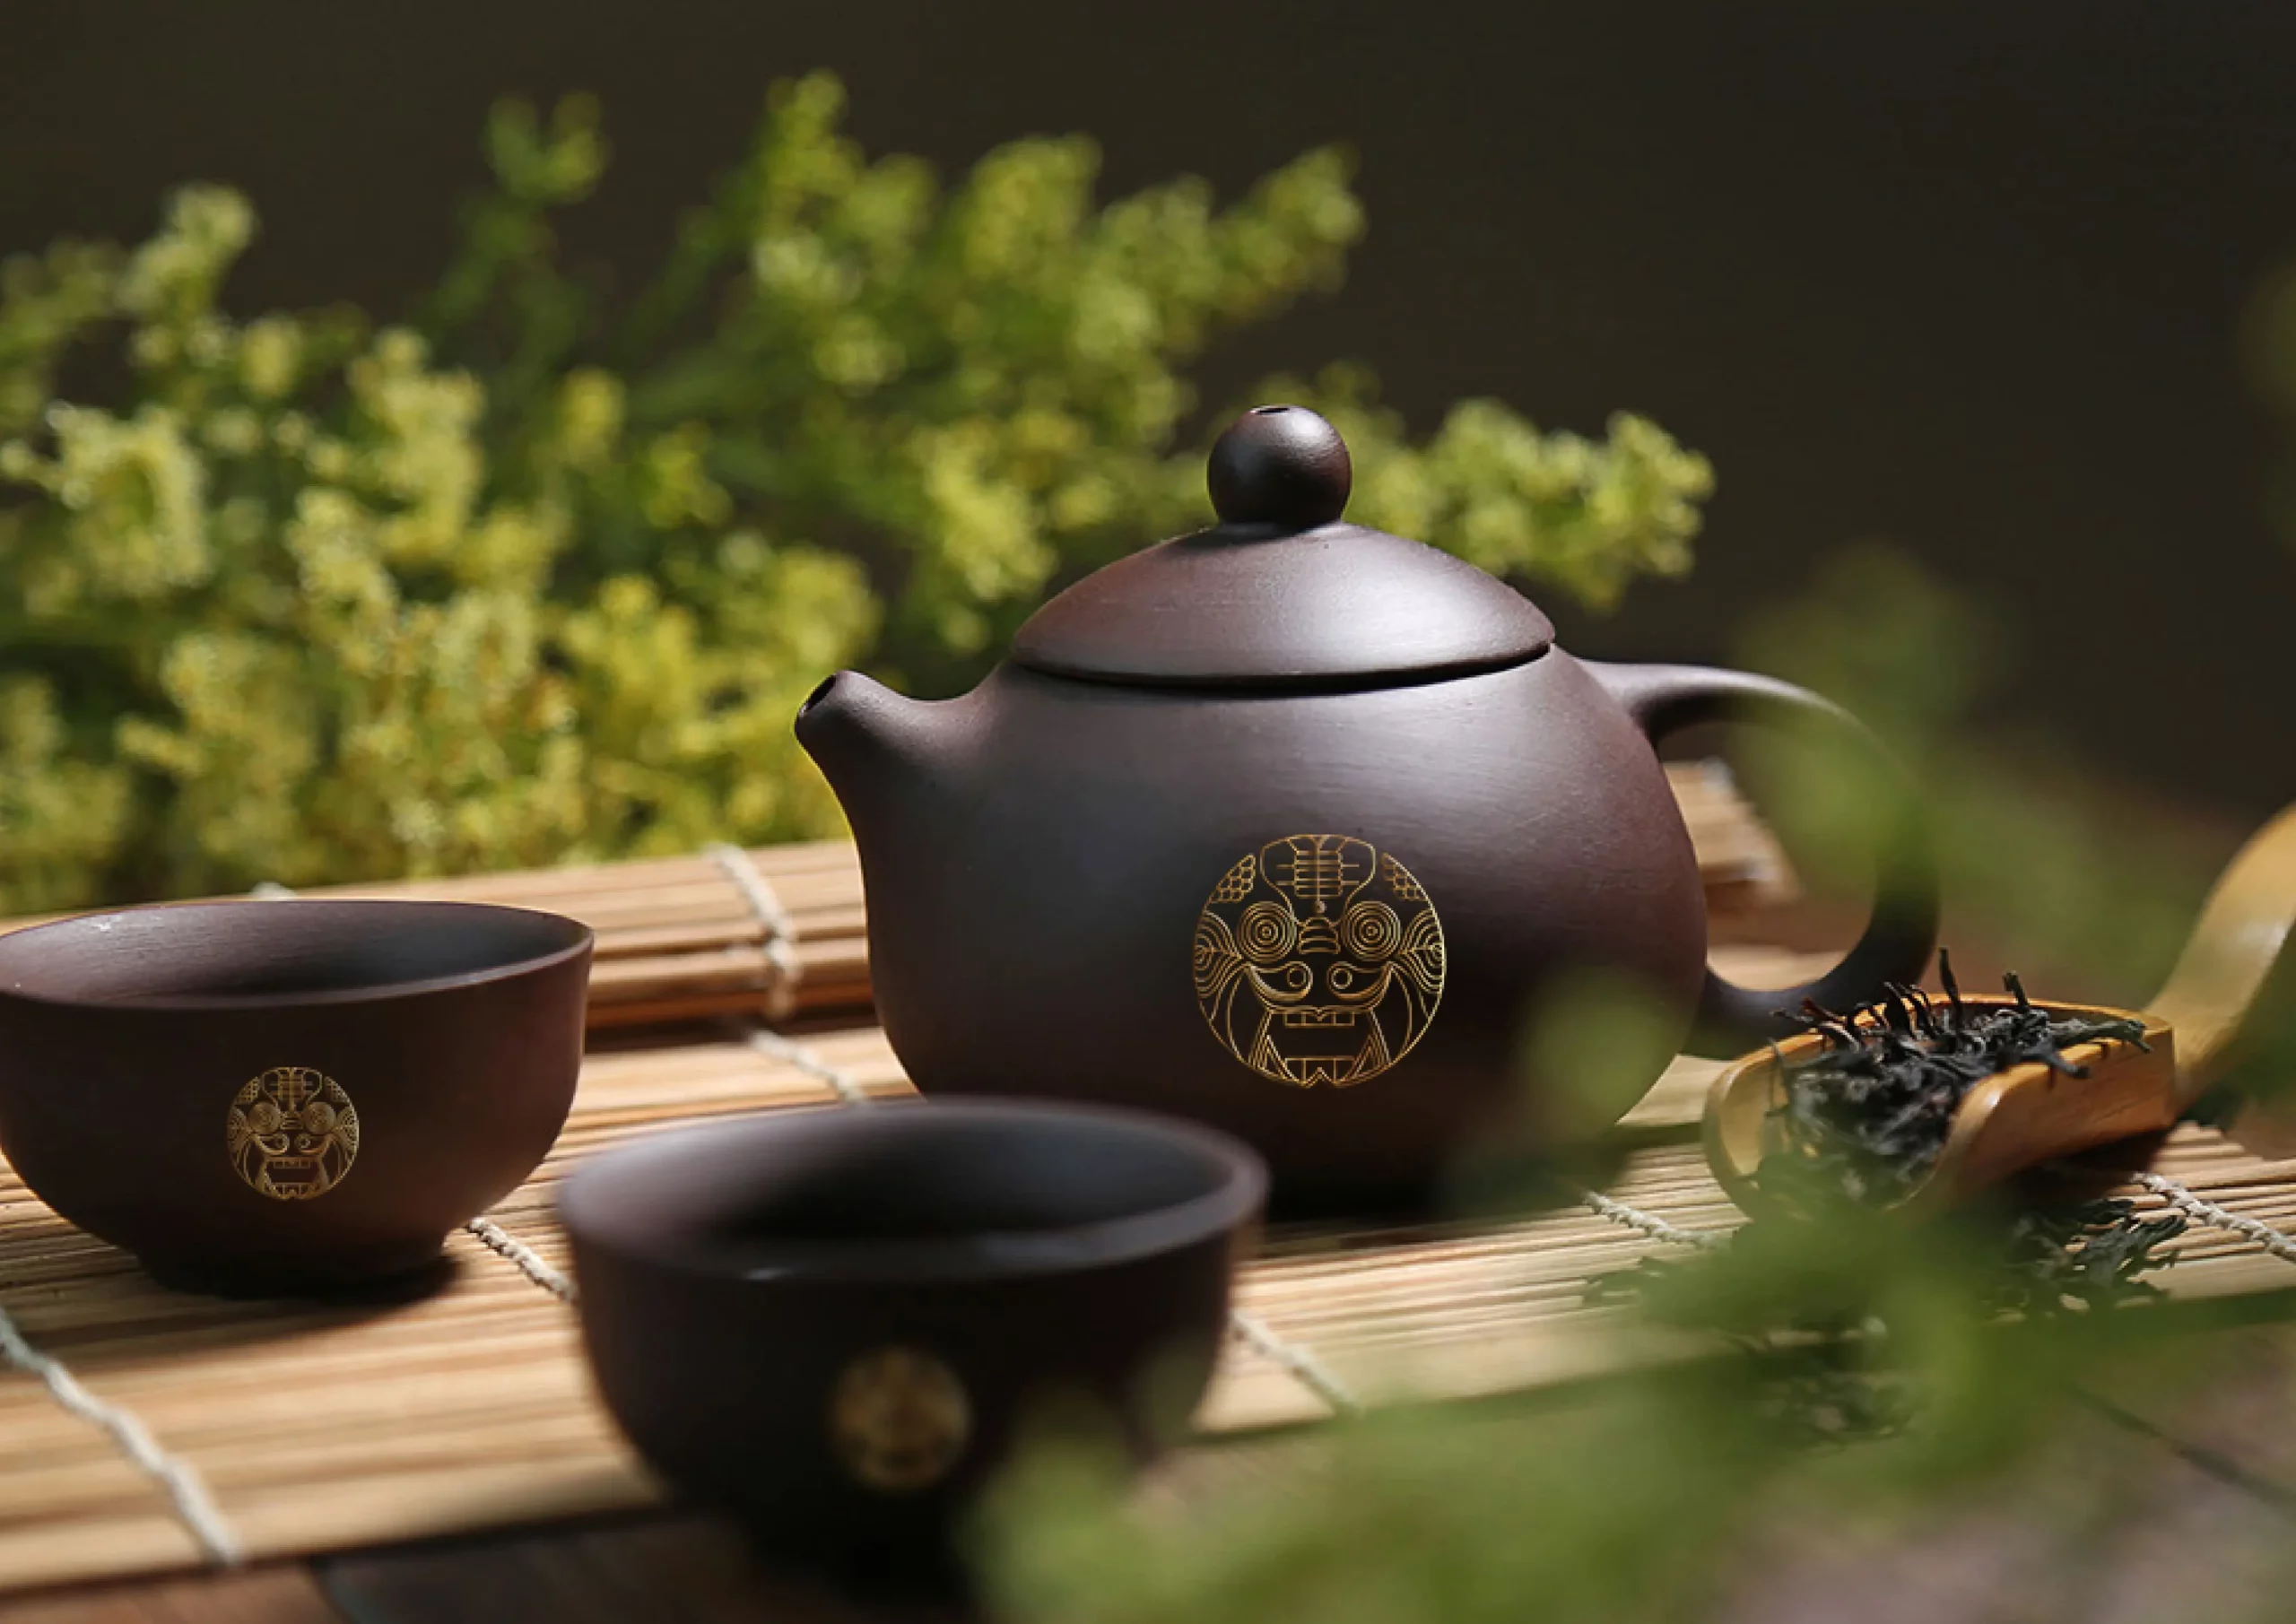 A tea set with two cups and a teapot on a bamboo mat.